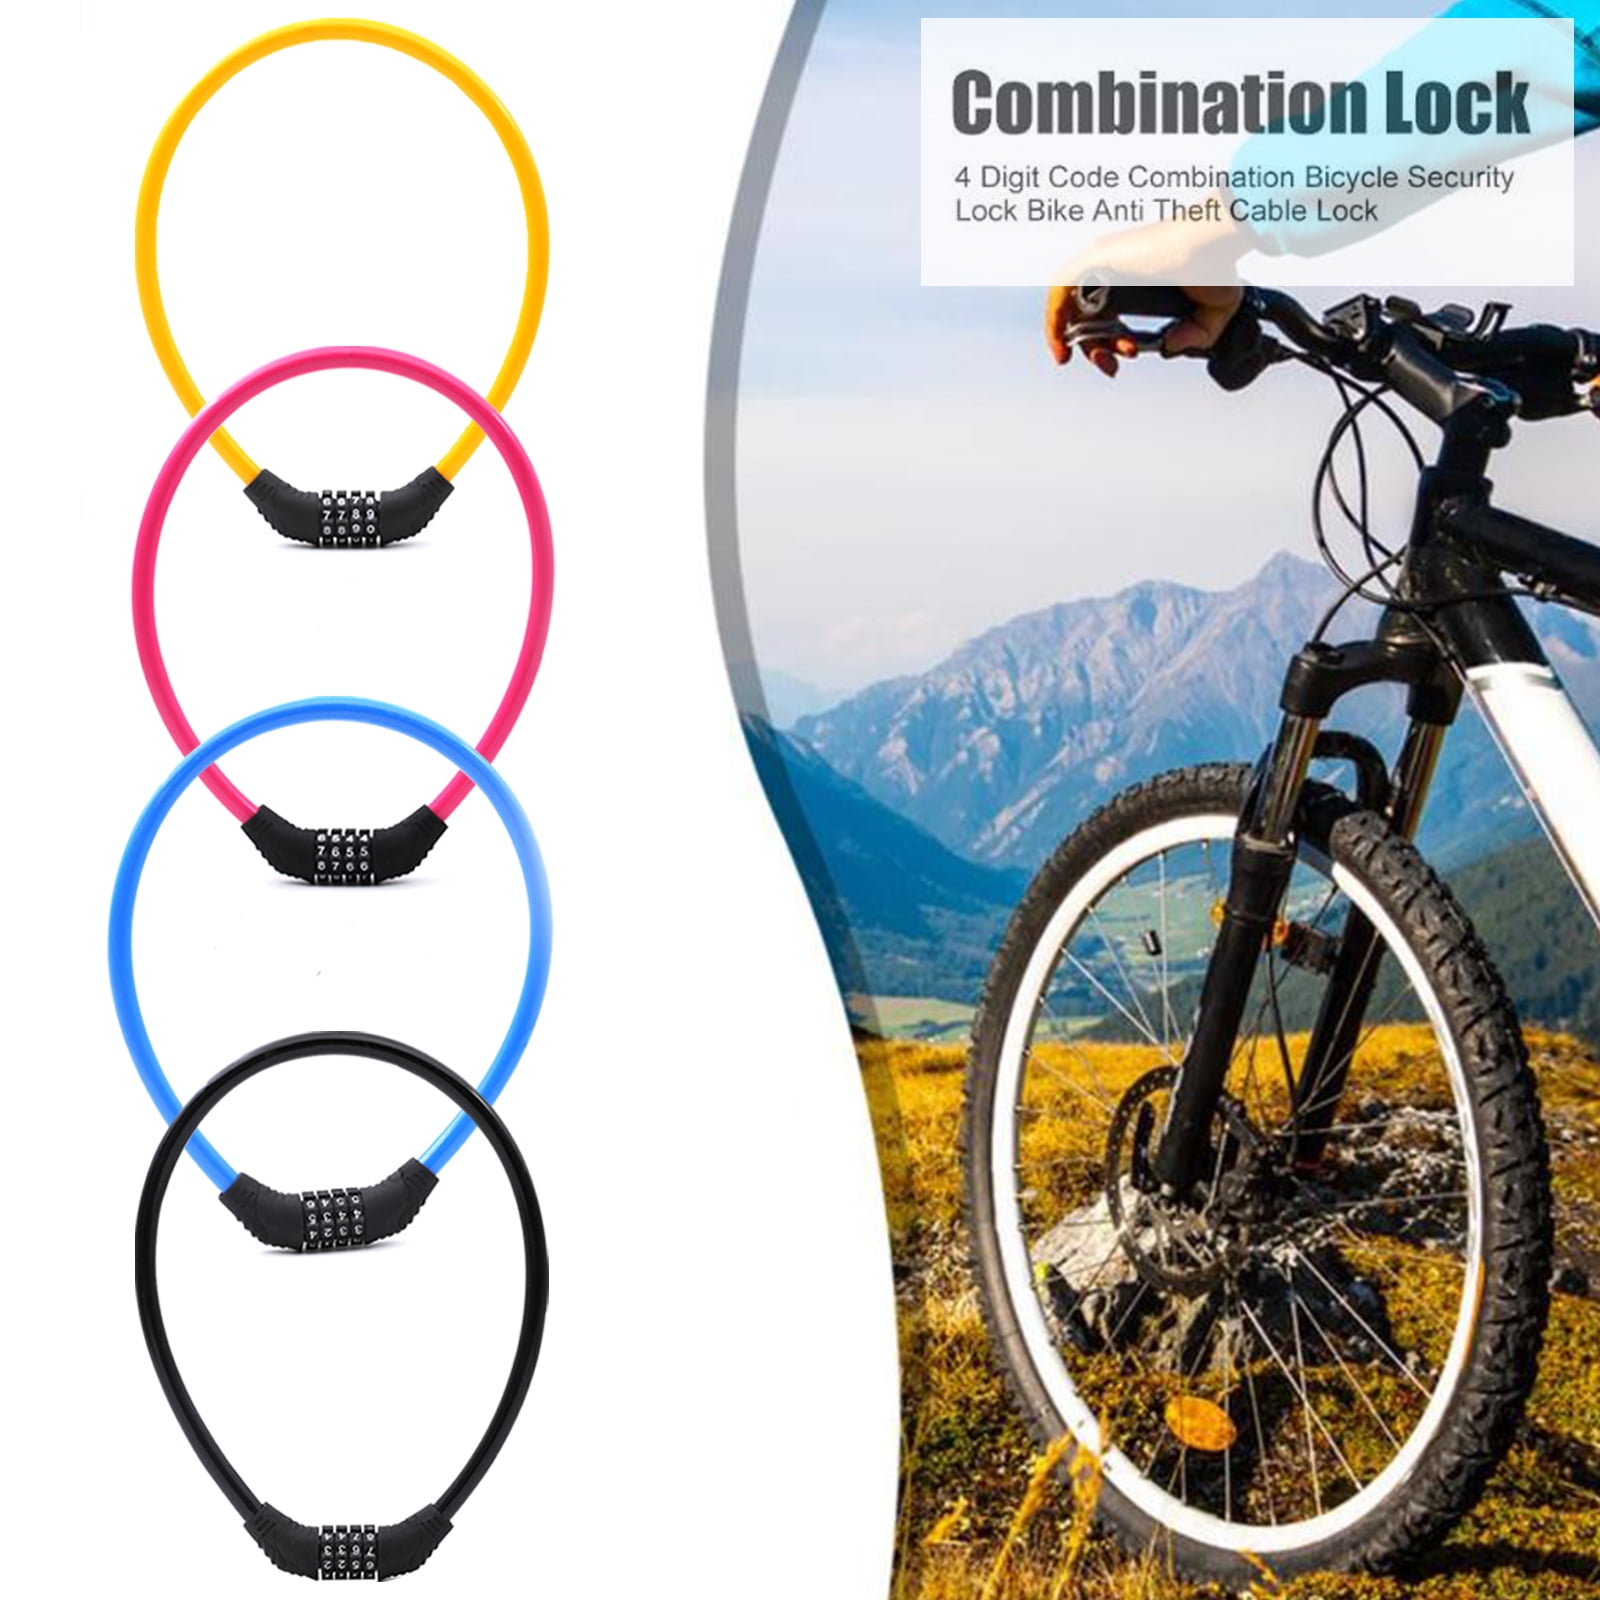 New Bike Cycle Lock Resettable 4 Digit Code  Cable Combination Security